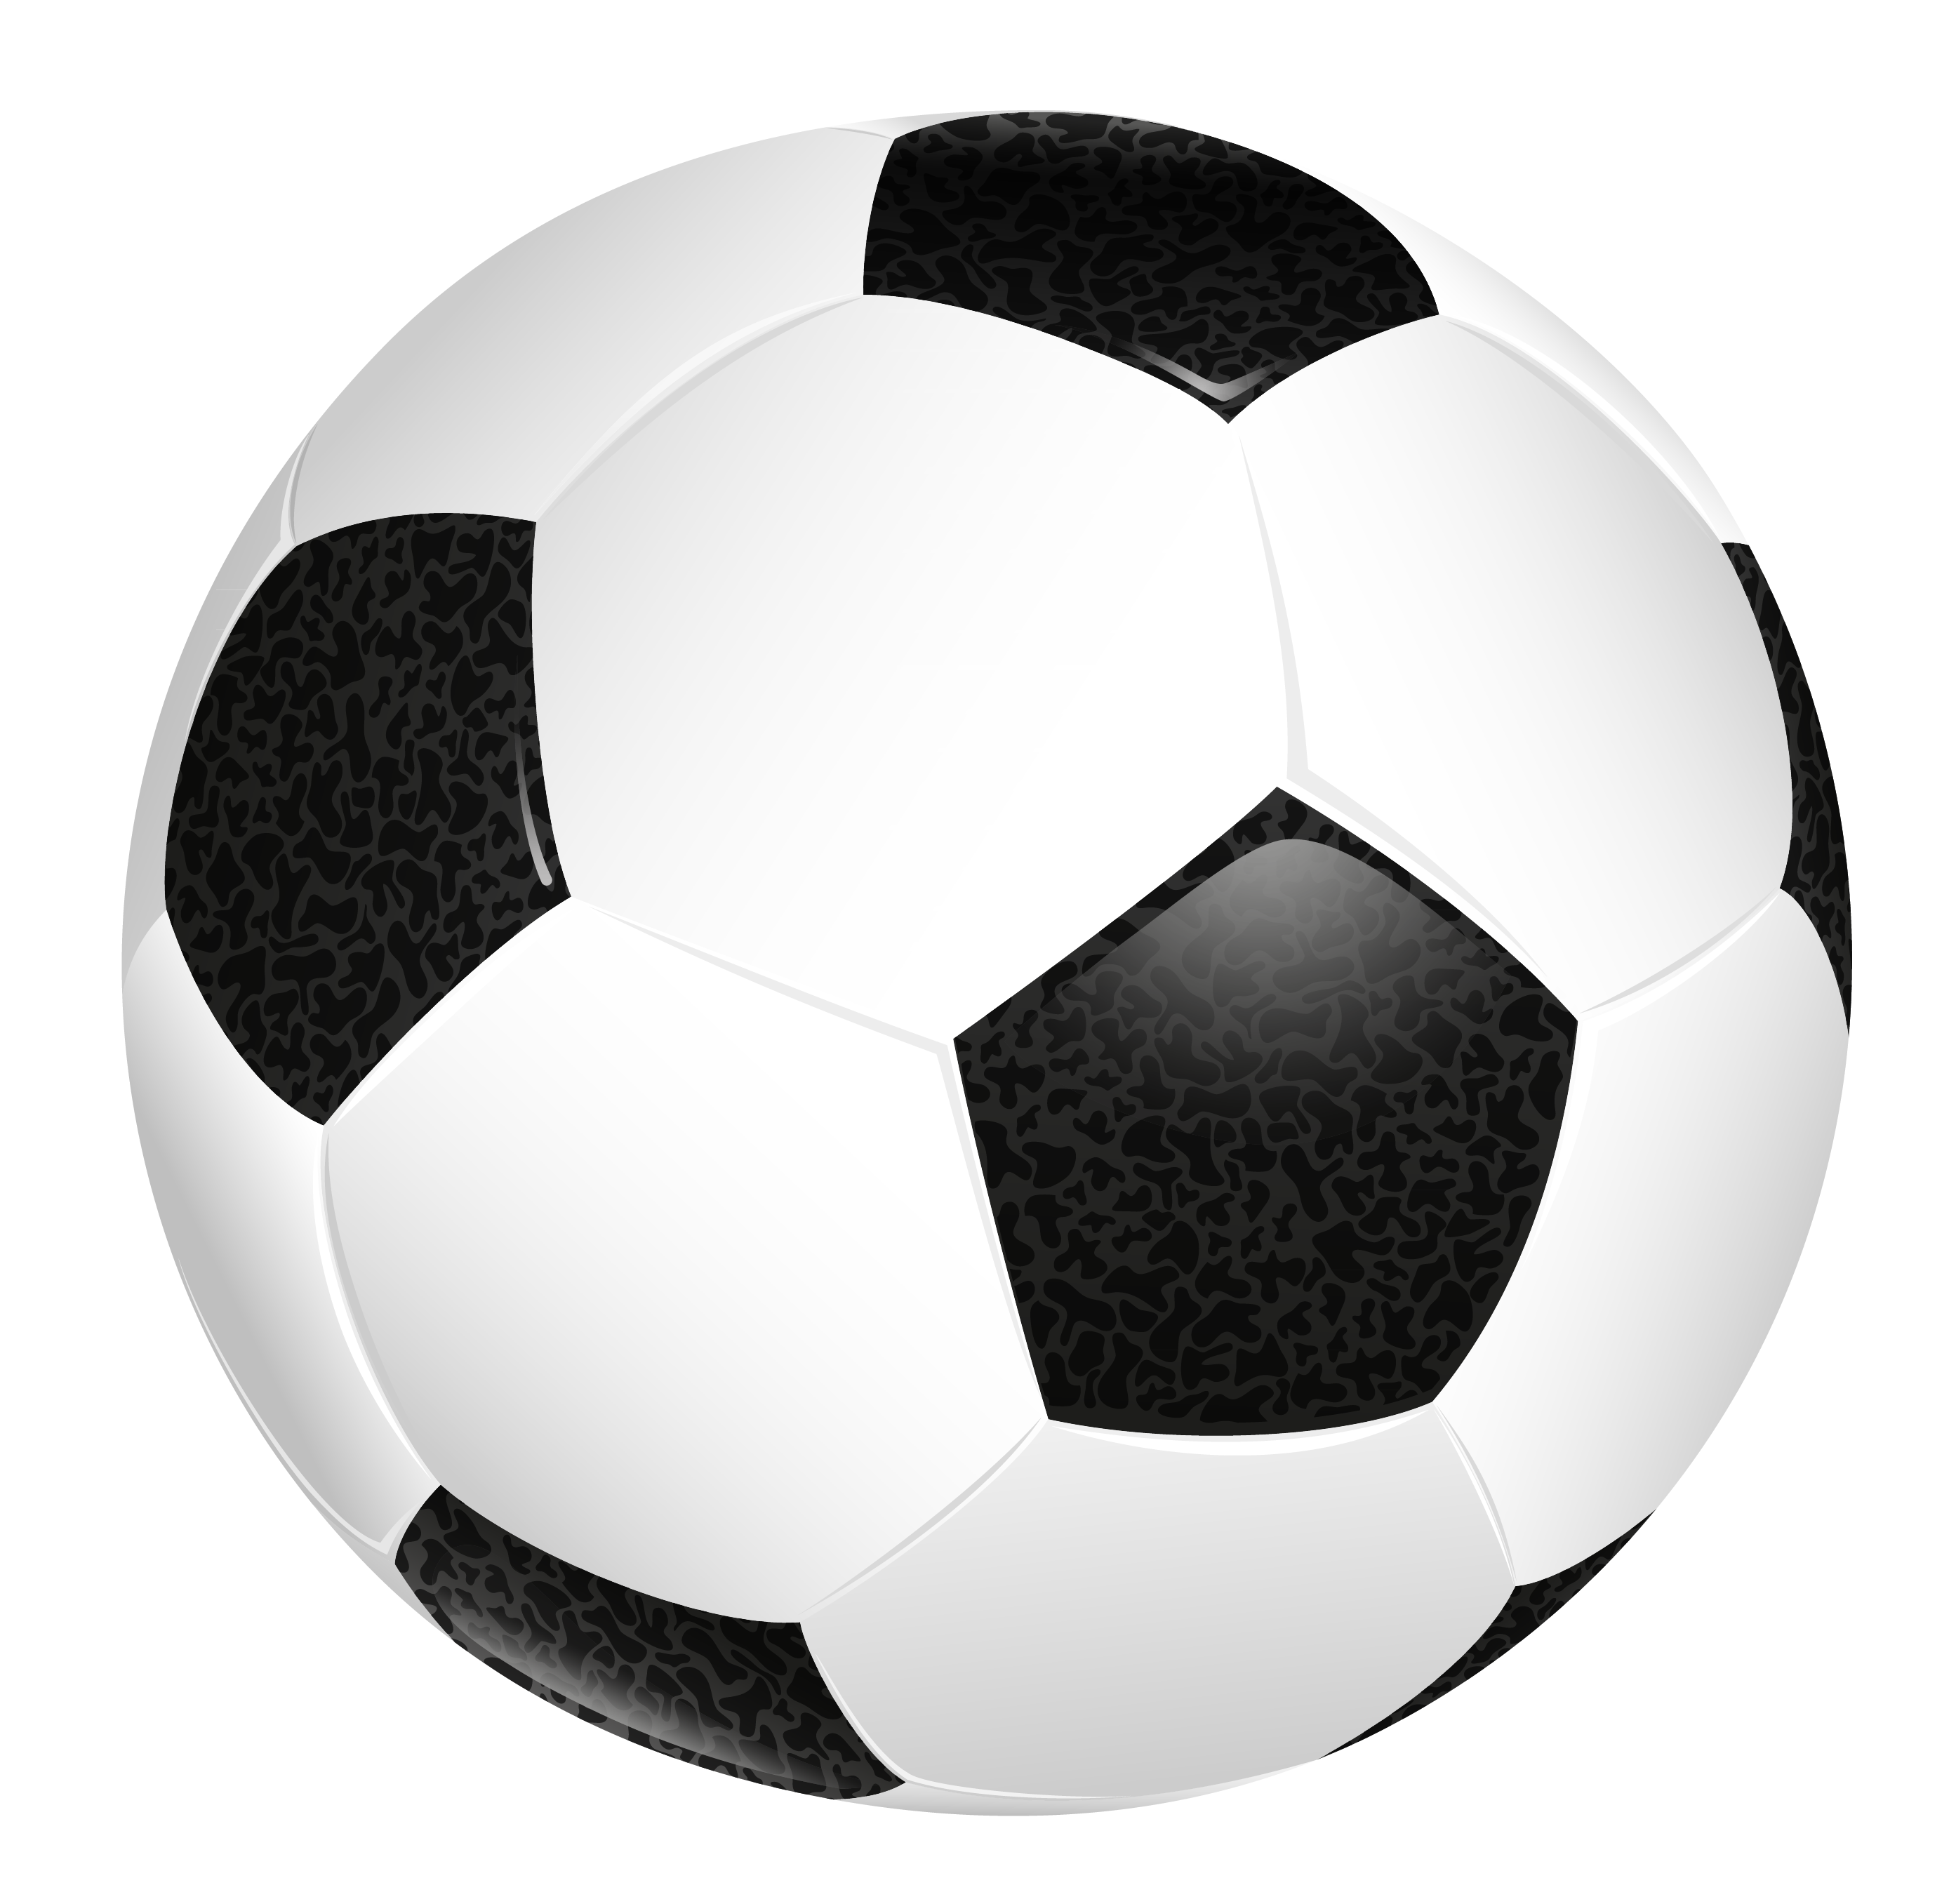 Soccer ball clip art images clipart clipartcow